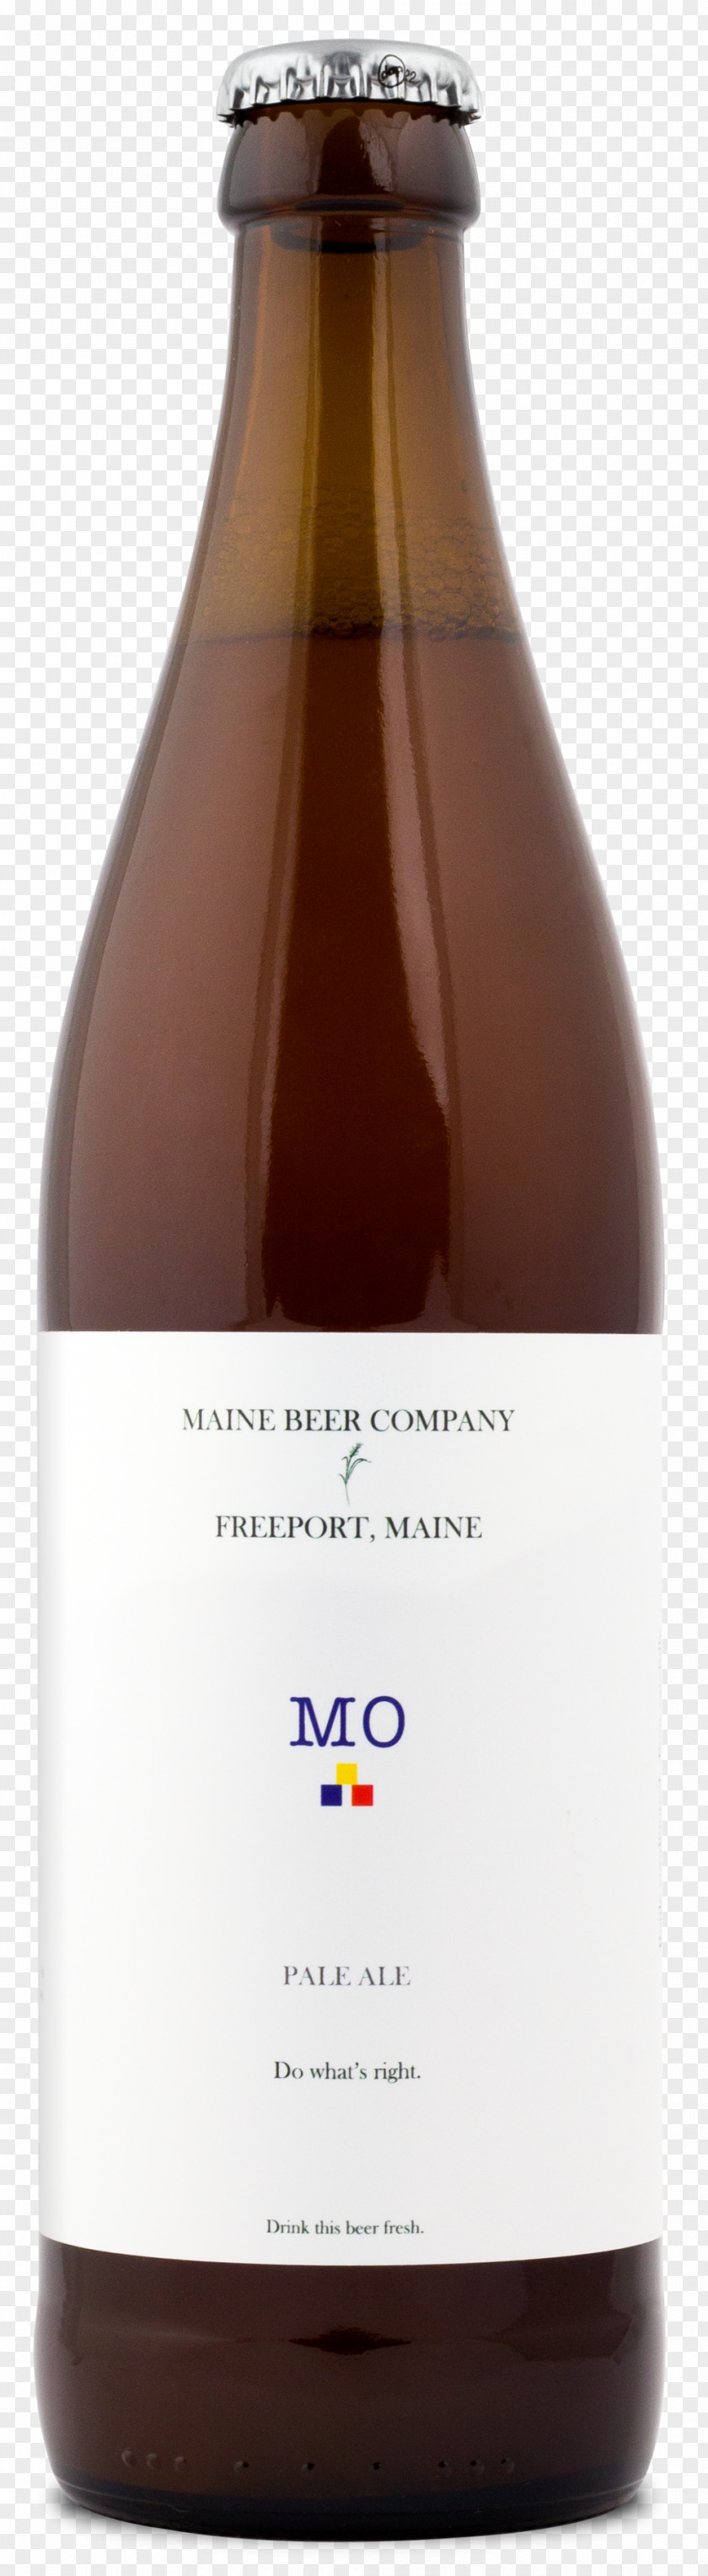 Beer Maine Company Pale Ale Bottle PNG